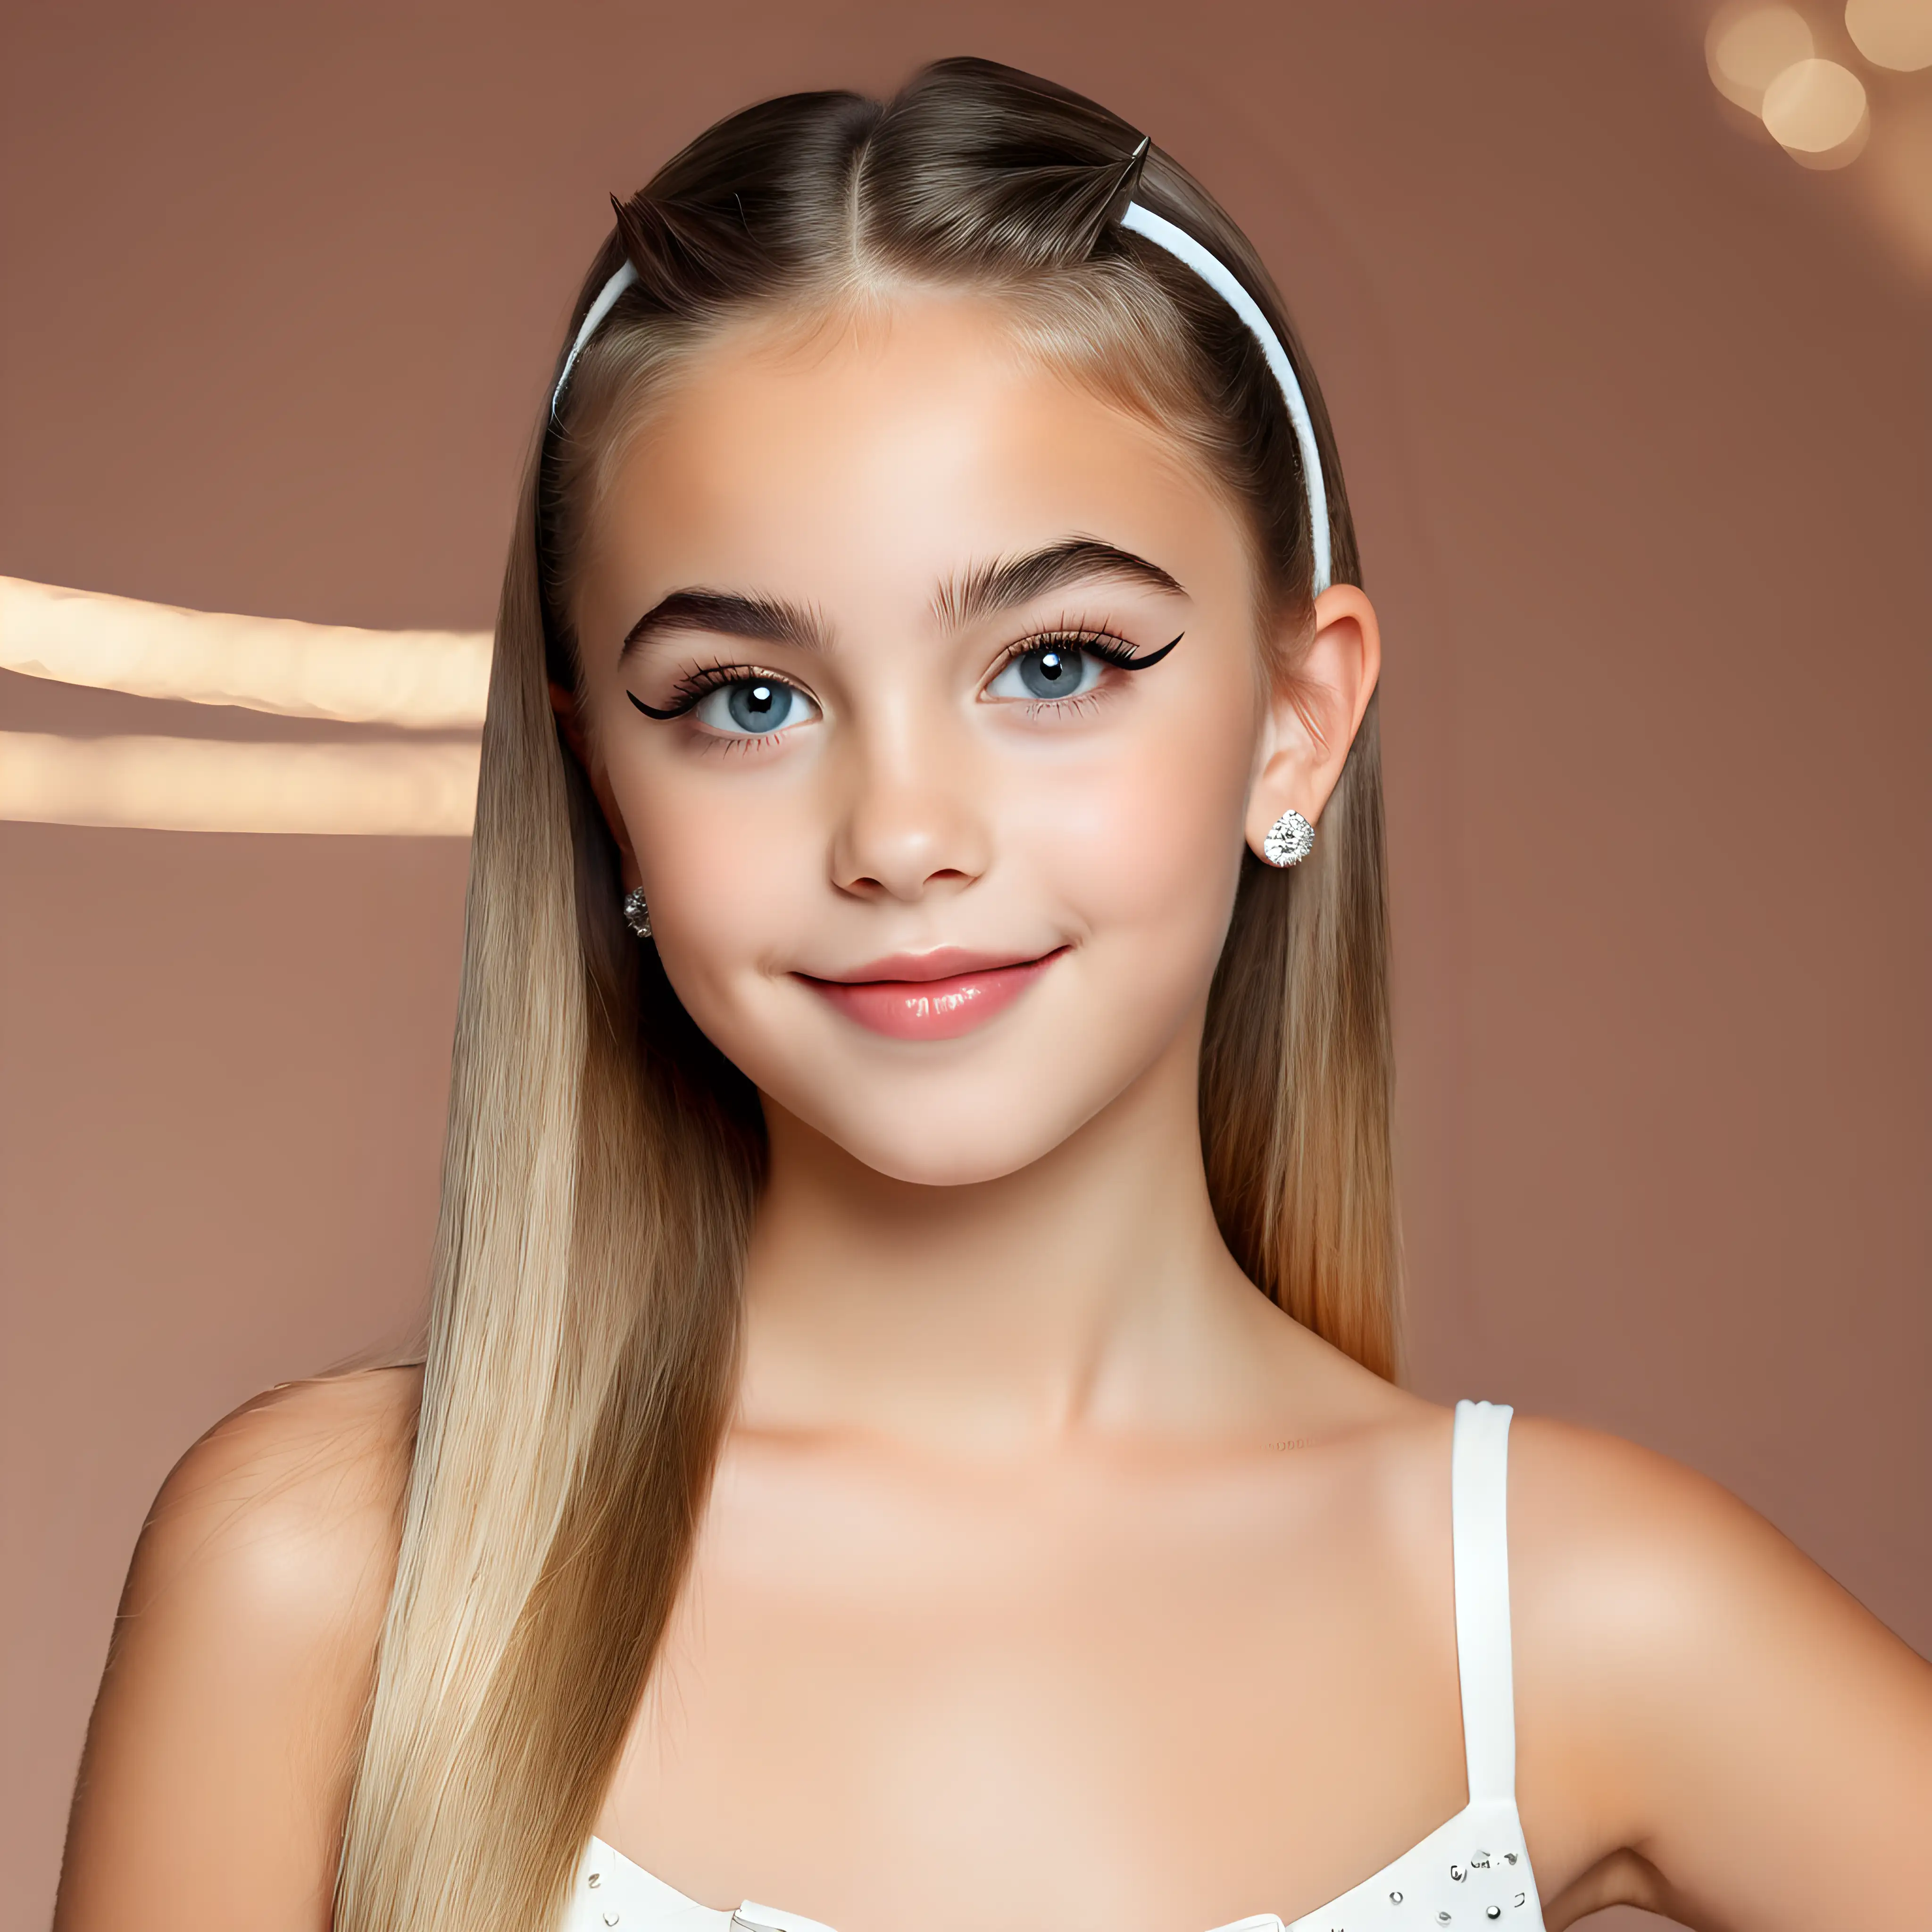 Adorable-11YearOld-White-Girl-with-Bratz-Model-Look-and-Innocent-Charm